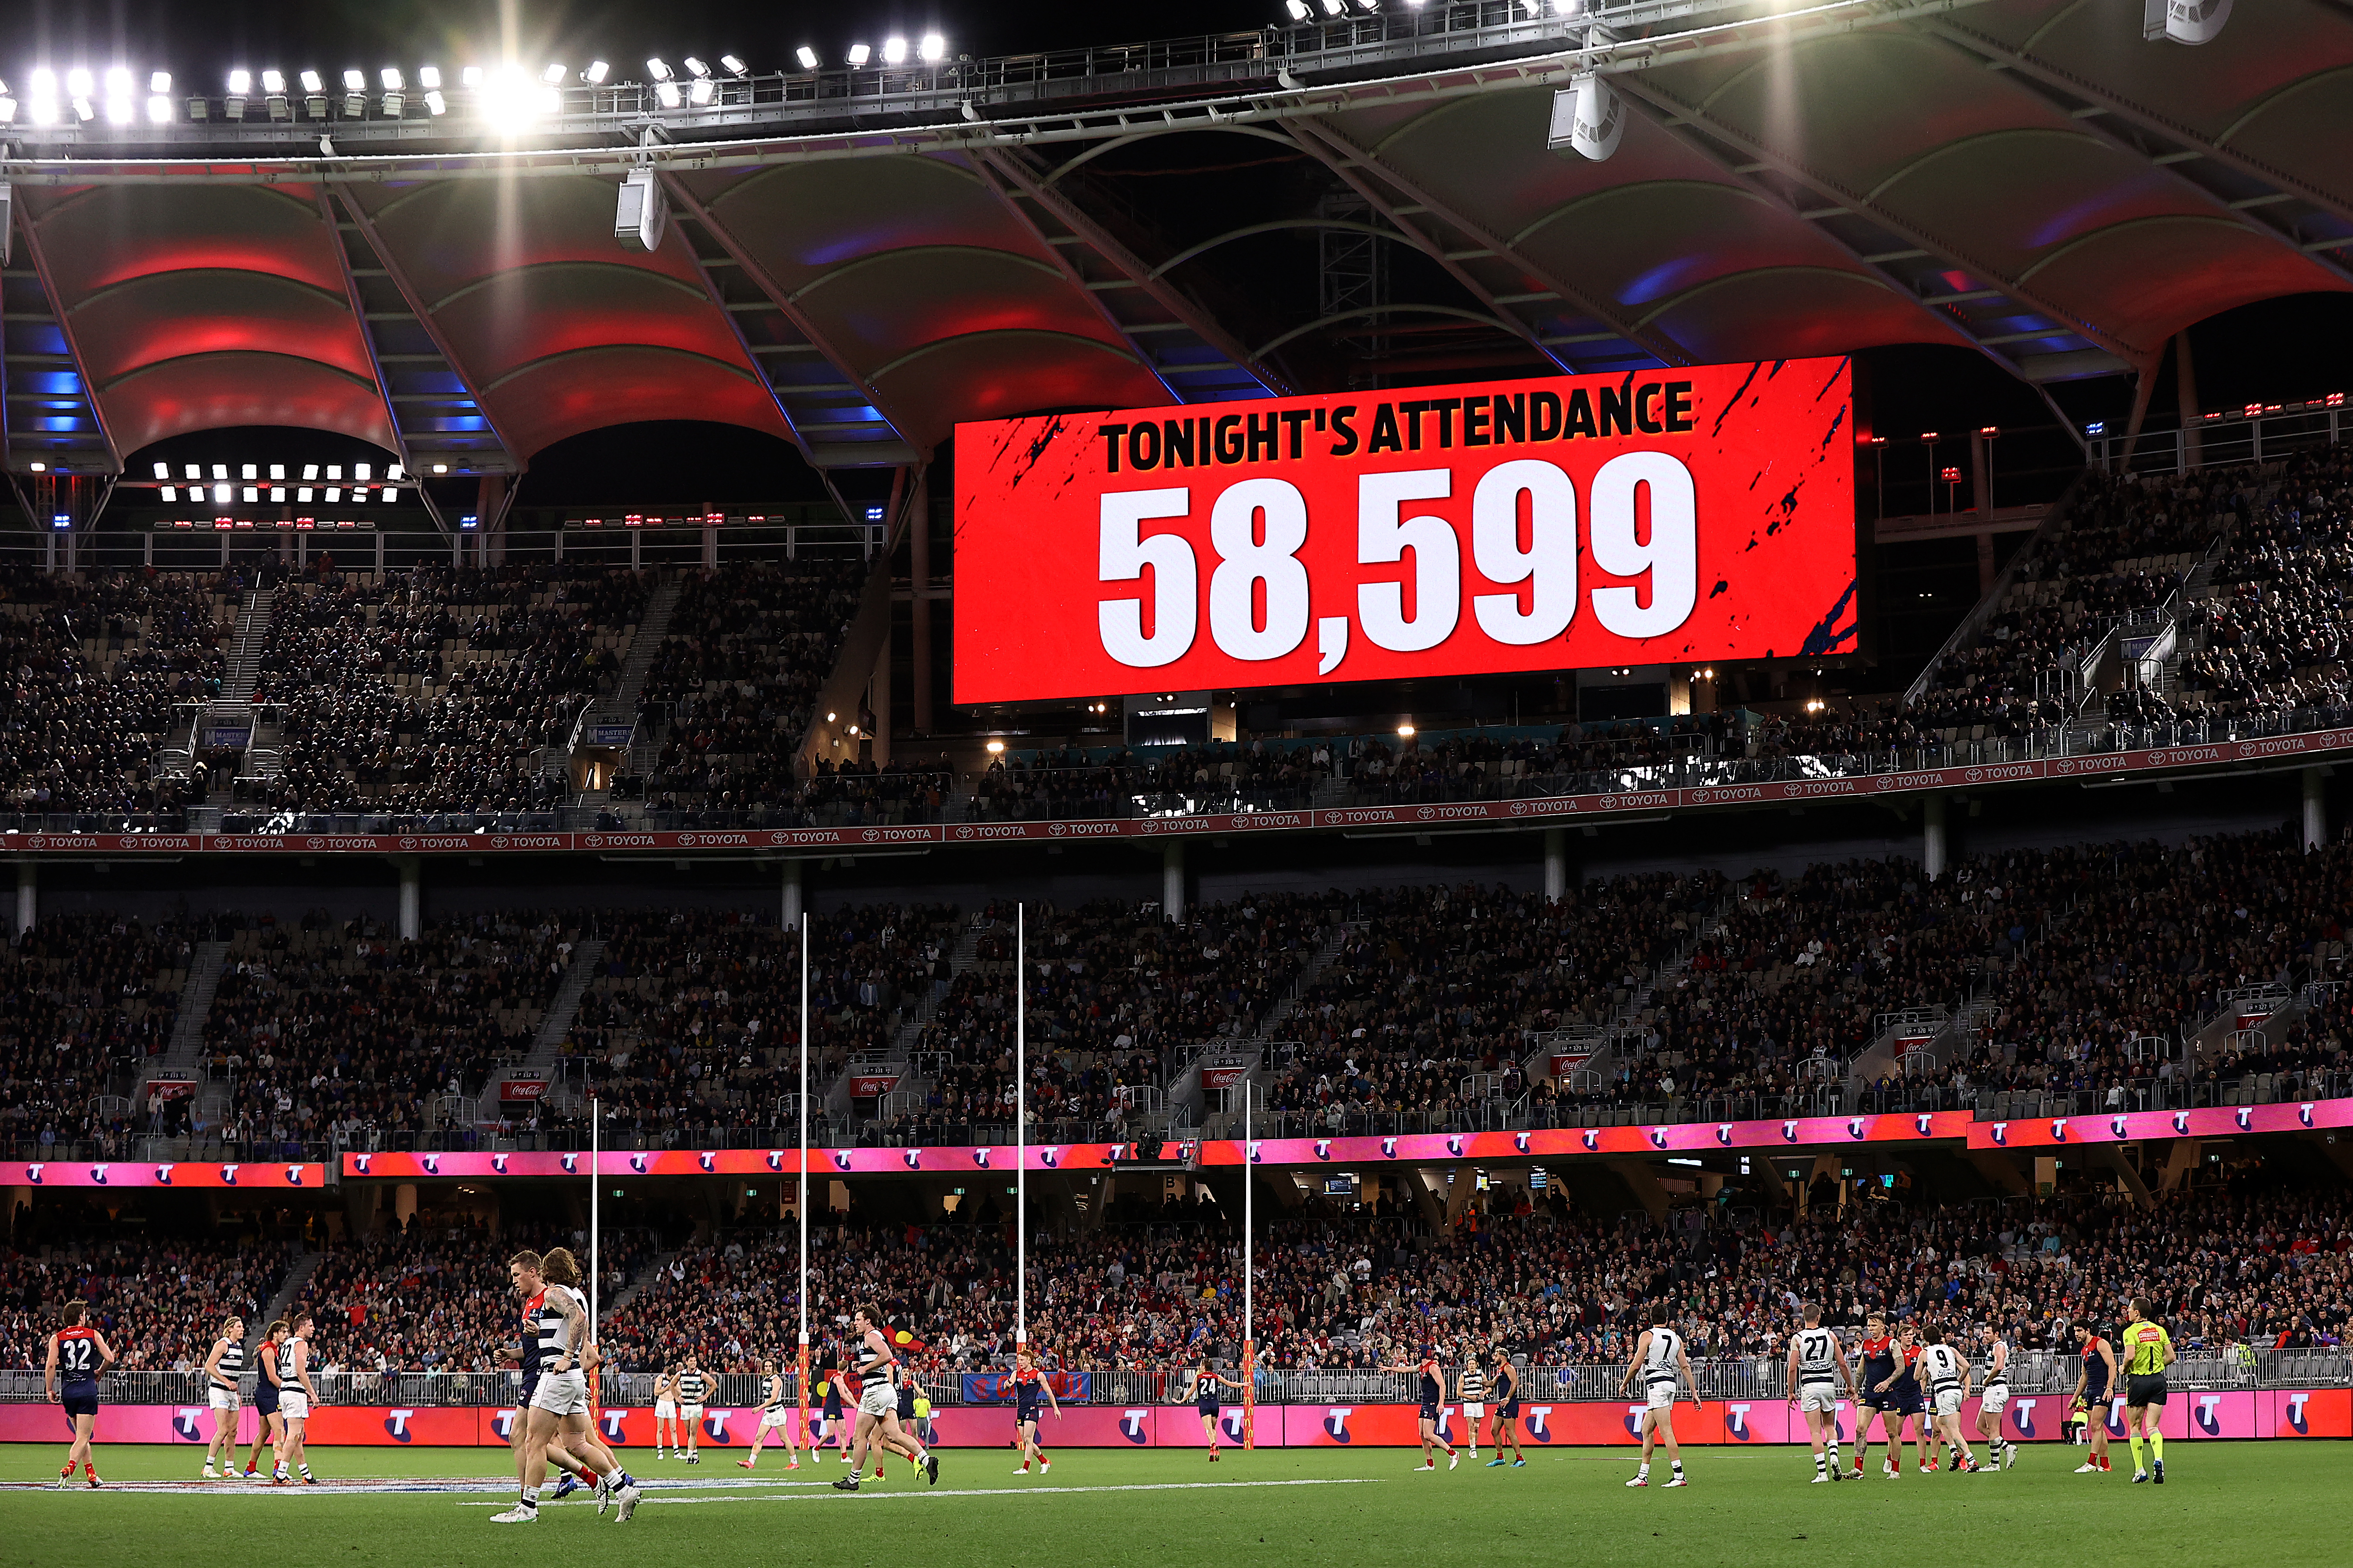 A big screen lit up in red shows the words: Tonight's attendance 58,599 at Perth Stadium during an AFL game. 